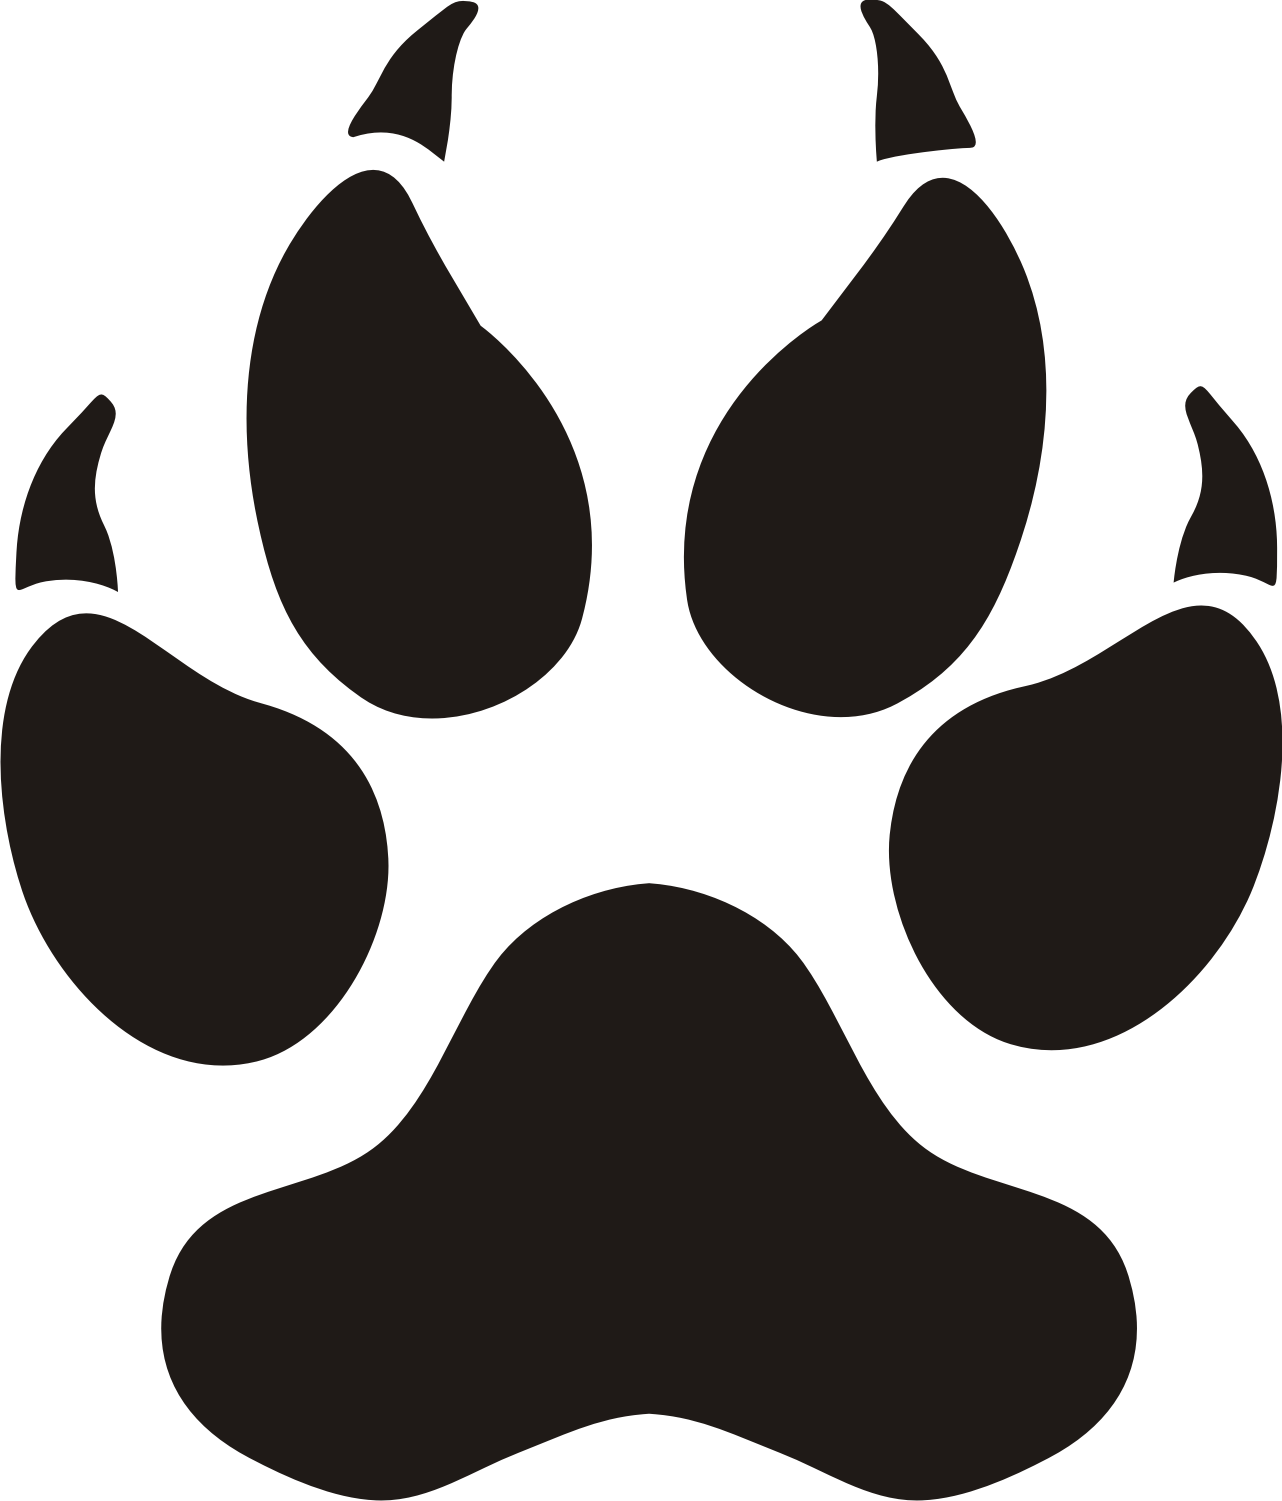 Outline Paw Print] - Clipart library